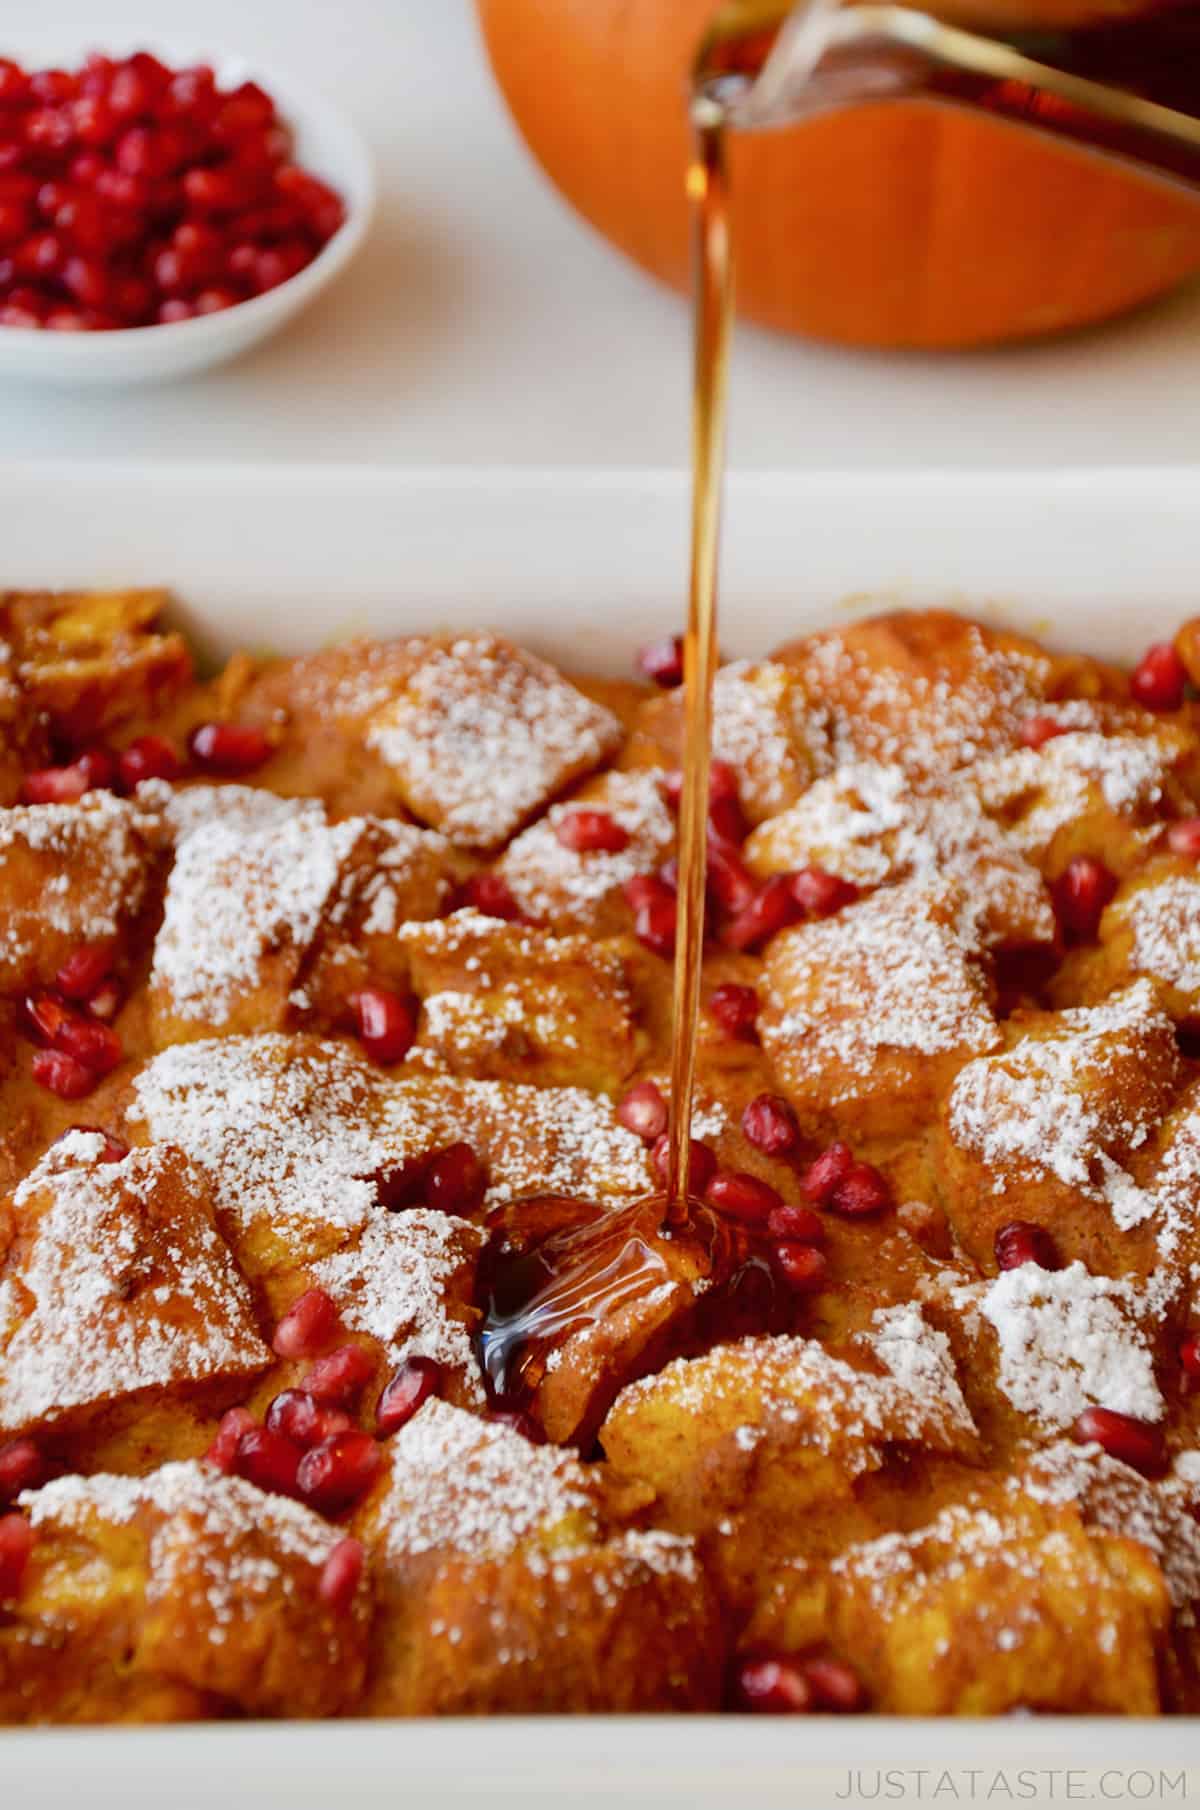 Maple syrup being poured onto a baking dish of pumpkin French toast casserole topped with pomegranate arils and powdered sugar.